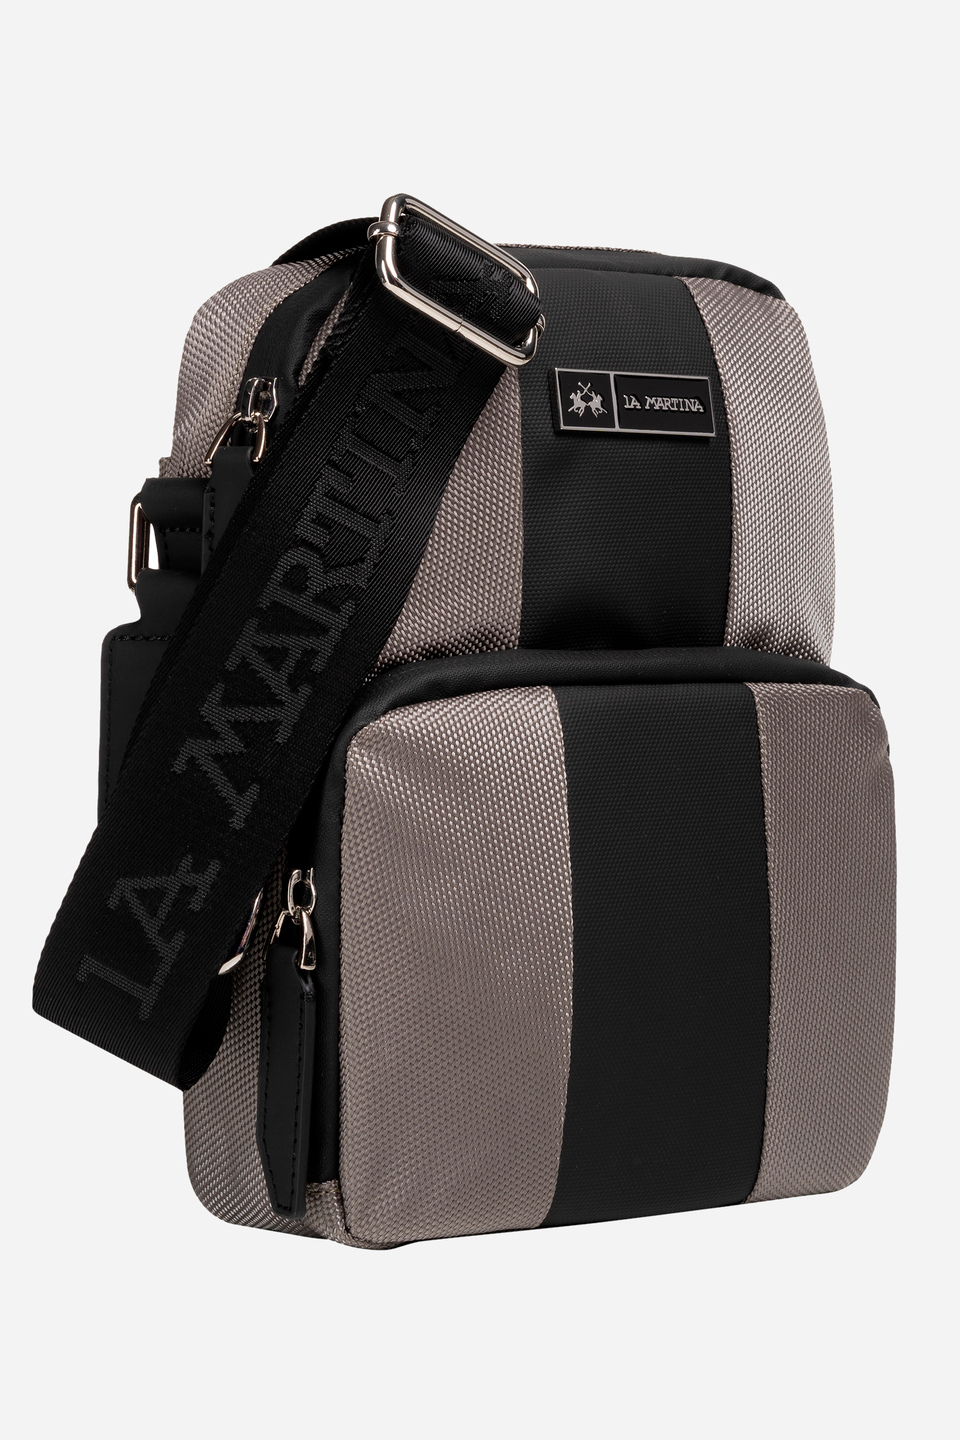 Polyester crossbody bag with a polyester webbing strap | La Martina - Official Online Shop